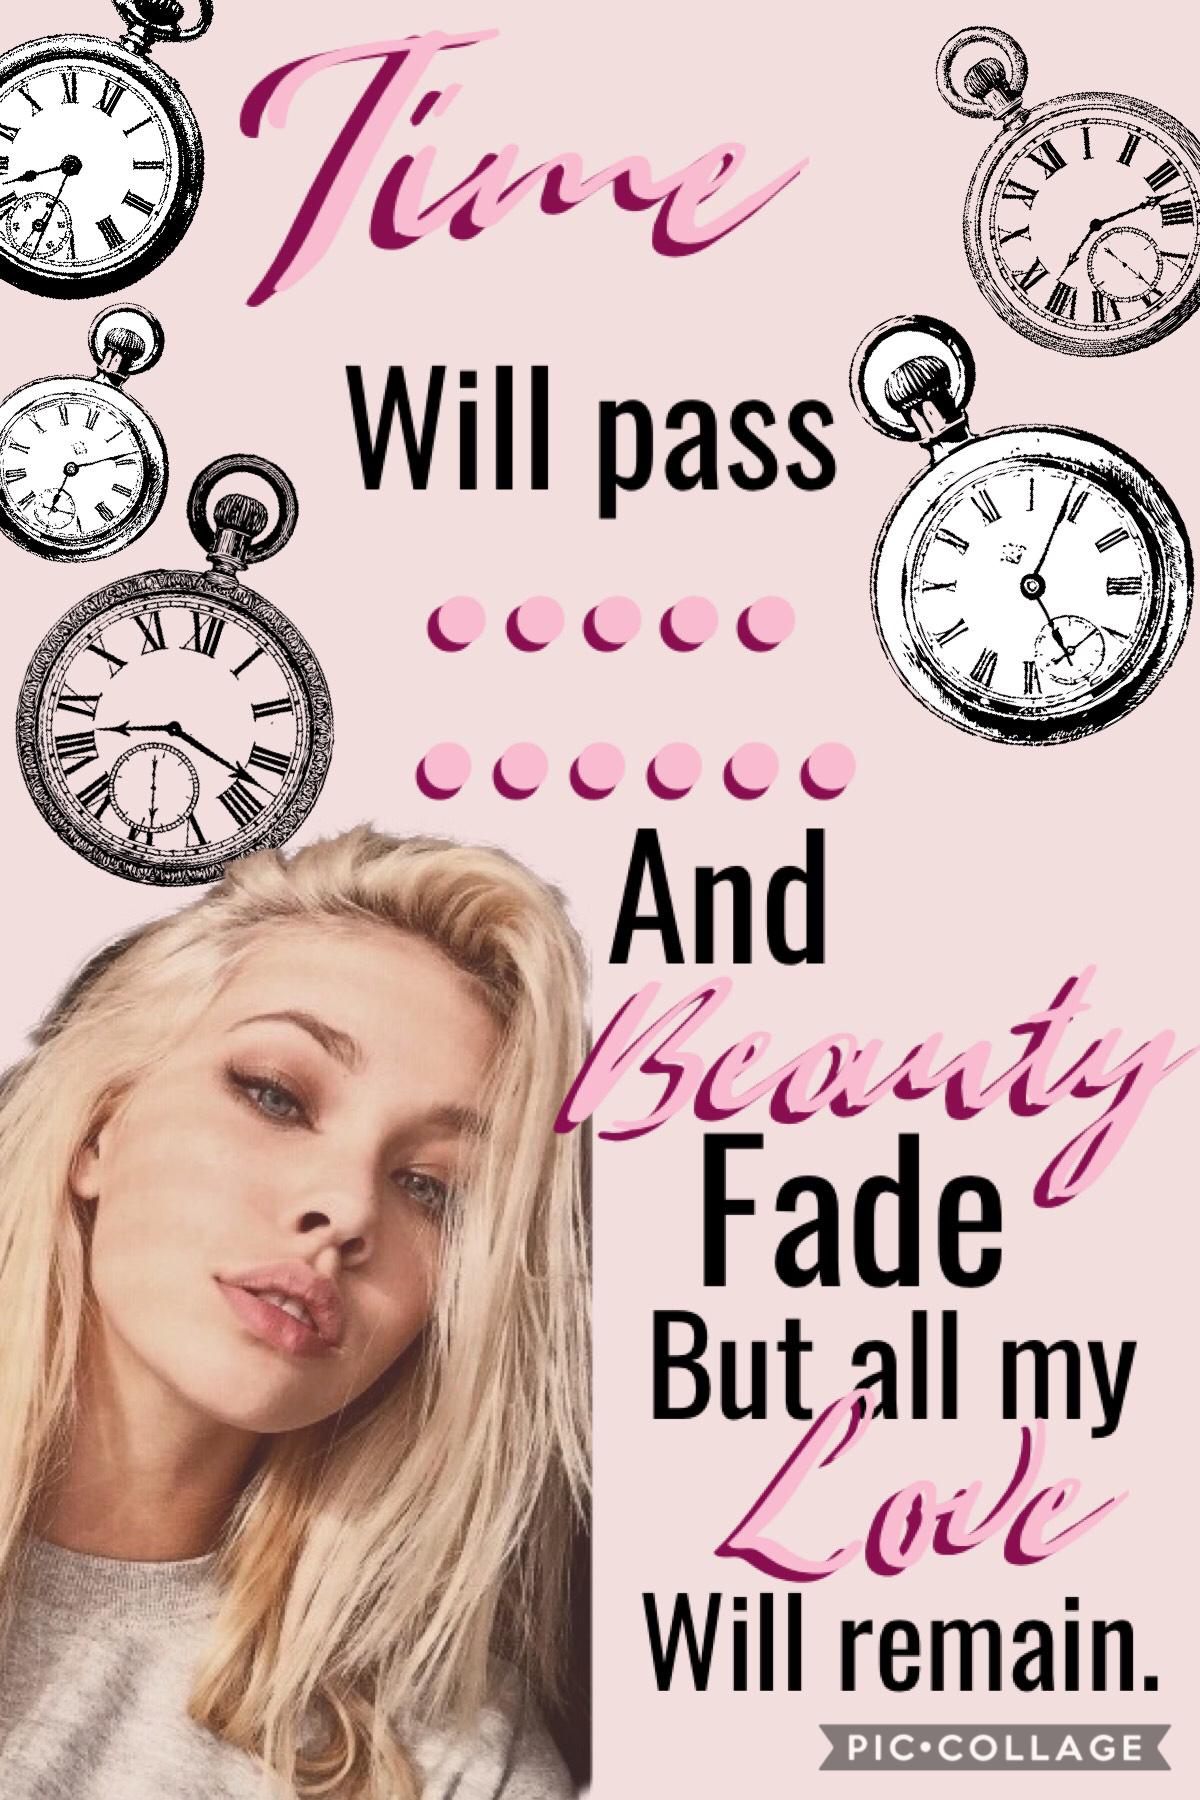 💗Tippity Tappity💗

Quote by Royal Tailor
Sorry the girl is a bit messy, it’s the only one I could find 🤷🏼‍♀️ Have an amazing day my loves 😙

11/26/18